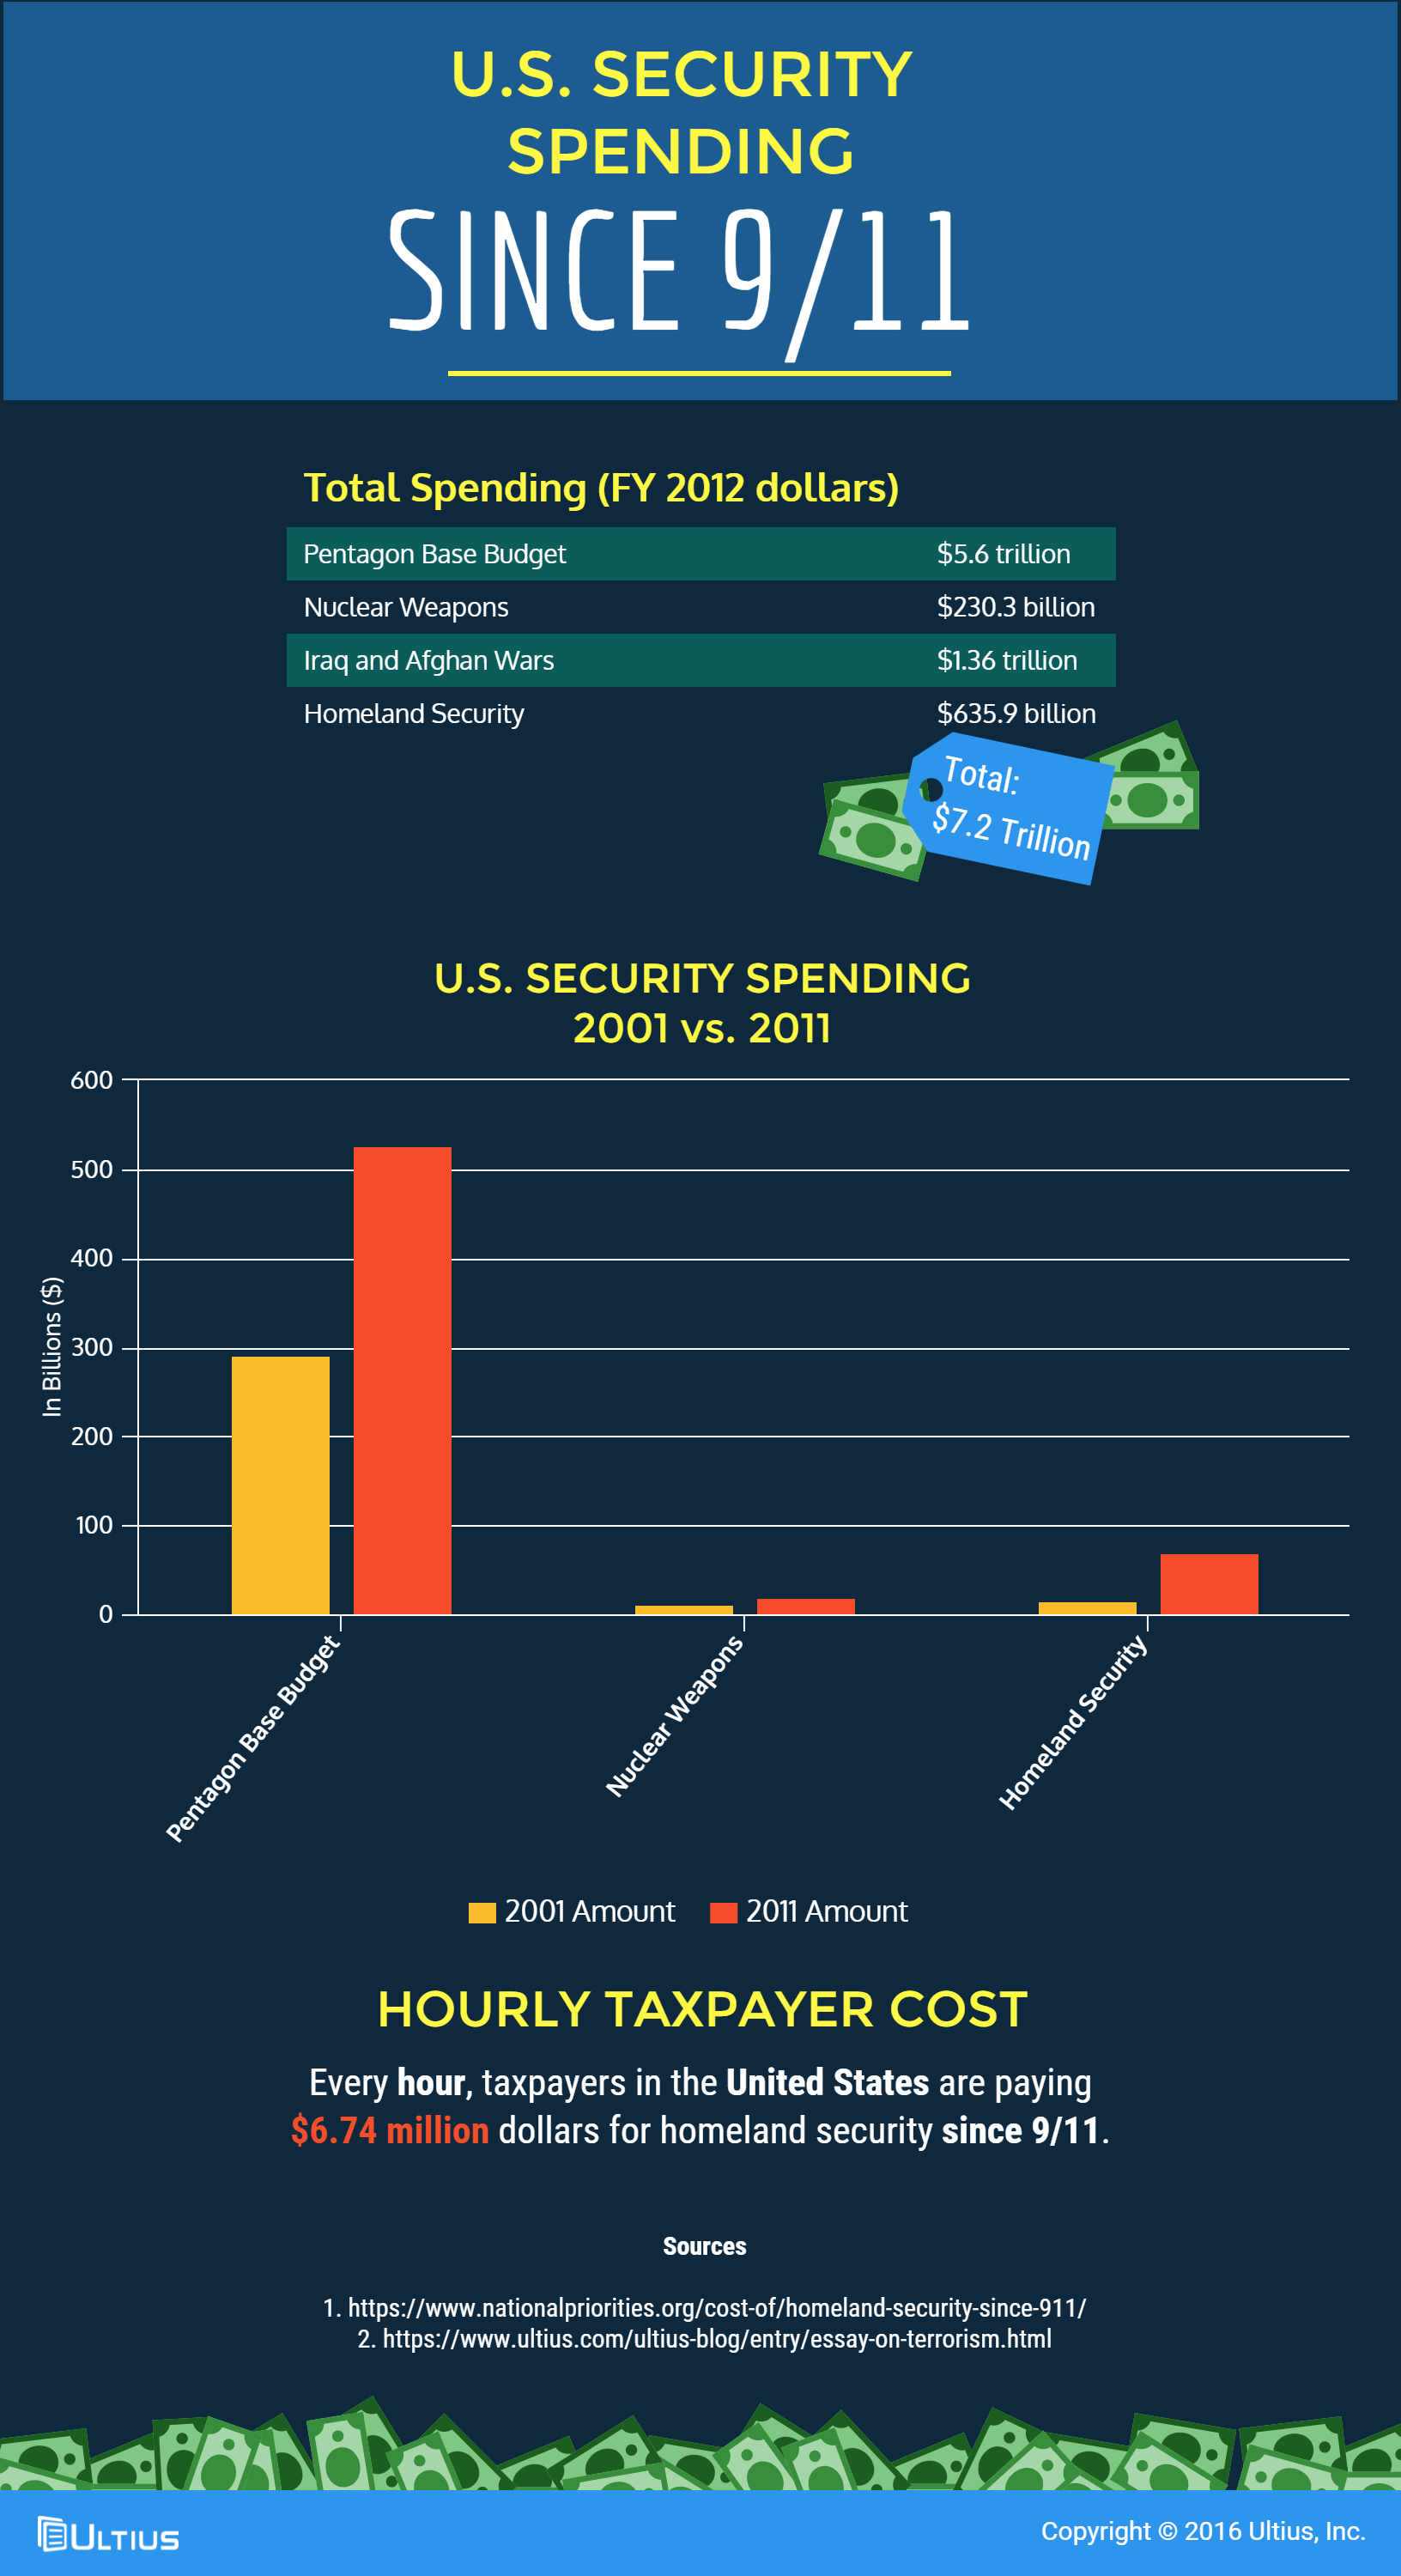 U.S. security spending since 9/11 infographic